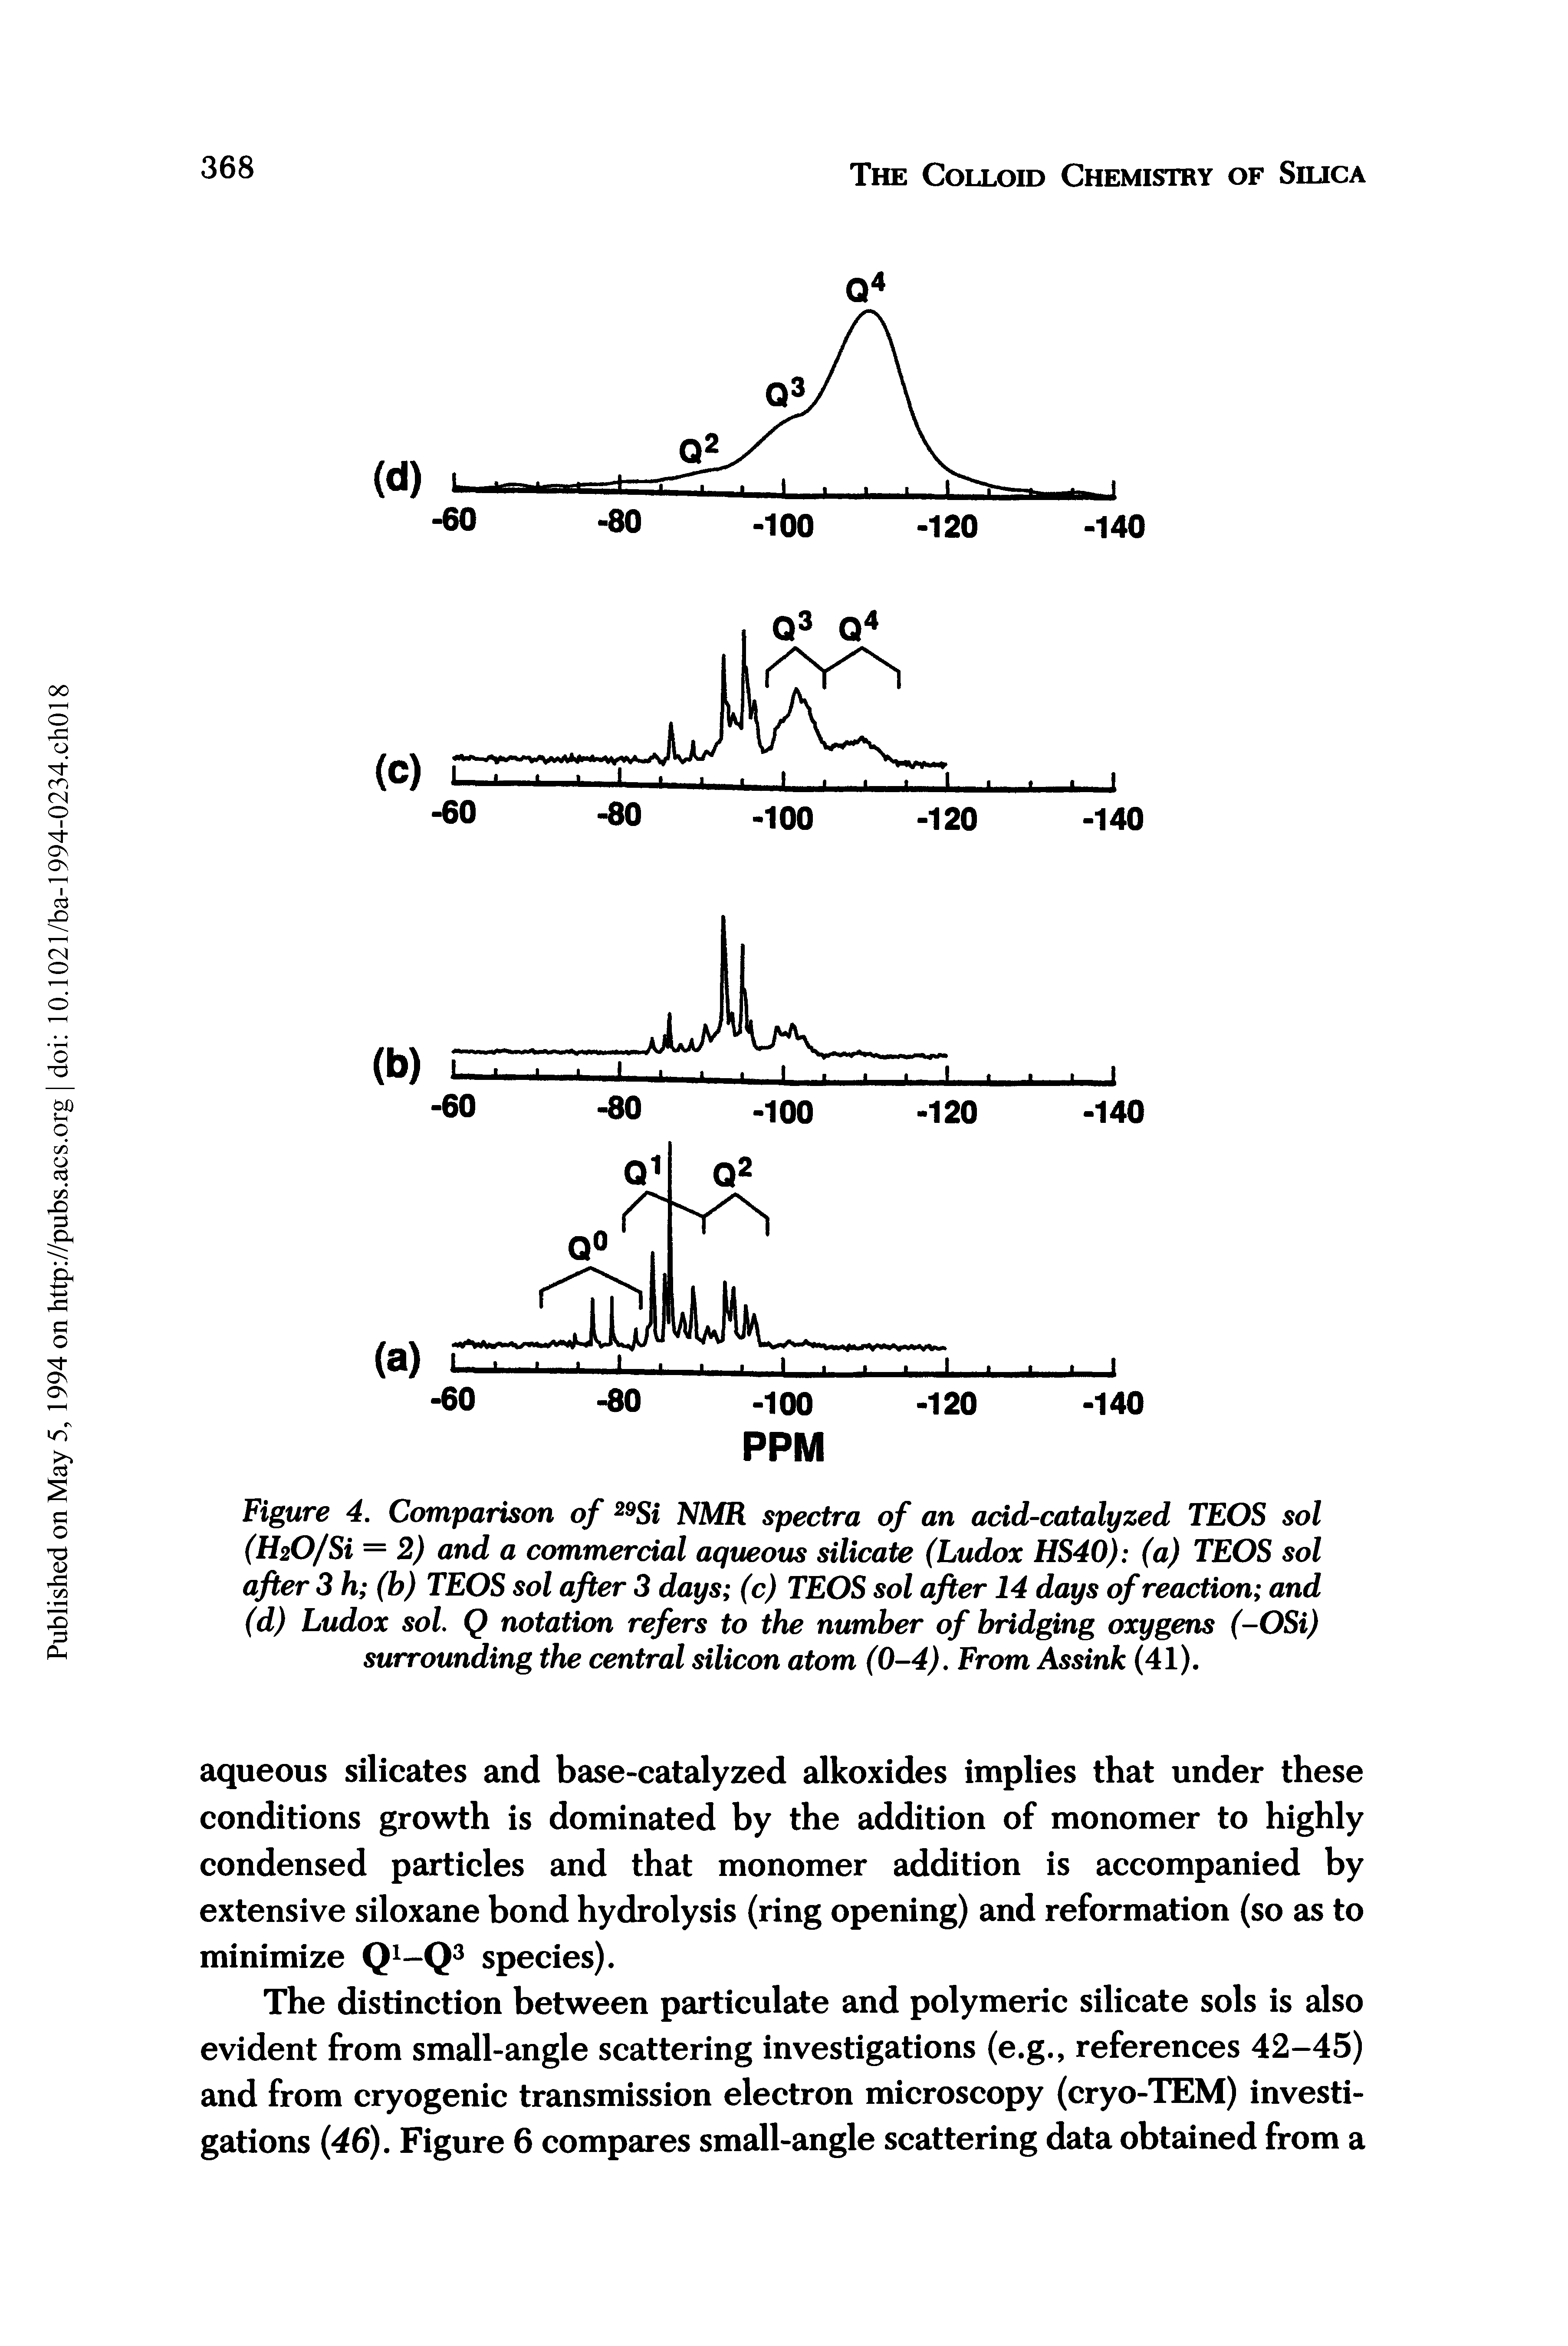 Figure 4. Comparison of 29Si NMR spectra of an add-catalyzed TEOS sol (H.20/Si = 2) and a commercial aqueous silicate (Ludox HS40) (a) TEOS sol after 3 h (b) TEOS sol after 3 days (c) TEOS sol after 14 days of reaction and (d) Ludox sol. Q notation refers to the number of bridging oxygens (-OSi) surrounding the central silicon atom (0-4). From Assink (41).